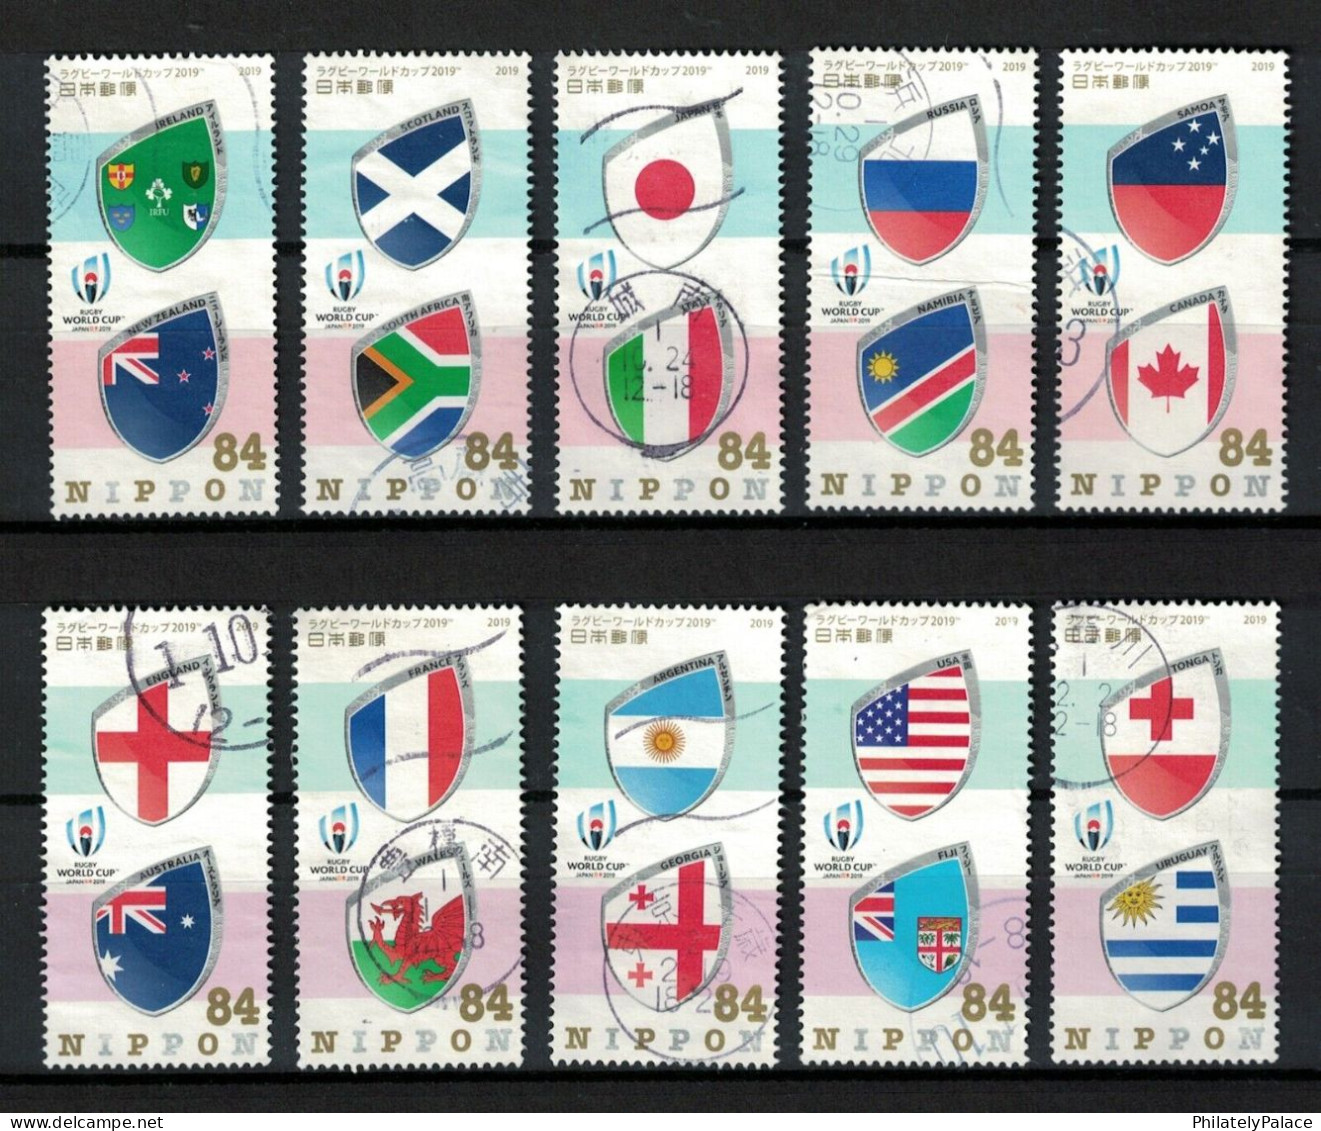 JAPAN 2019 RUGBY WORLD CUP,IRELAND,NEW ZEALAND,SOUTH AFRICA,SCOTLAND,ITALY,RUSSIA,NAMBIA,CANADA,SAMOA,10V Used SET - Oblitérés